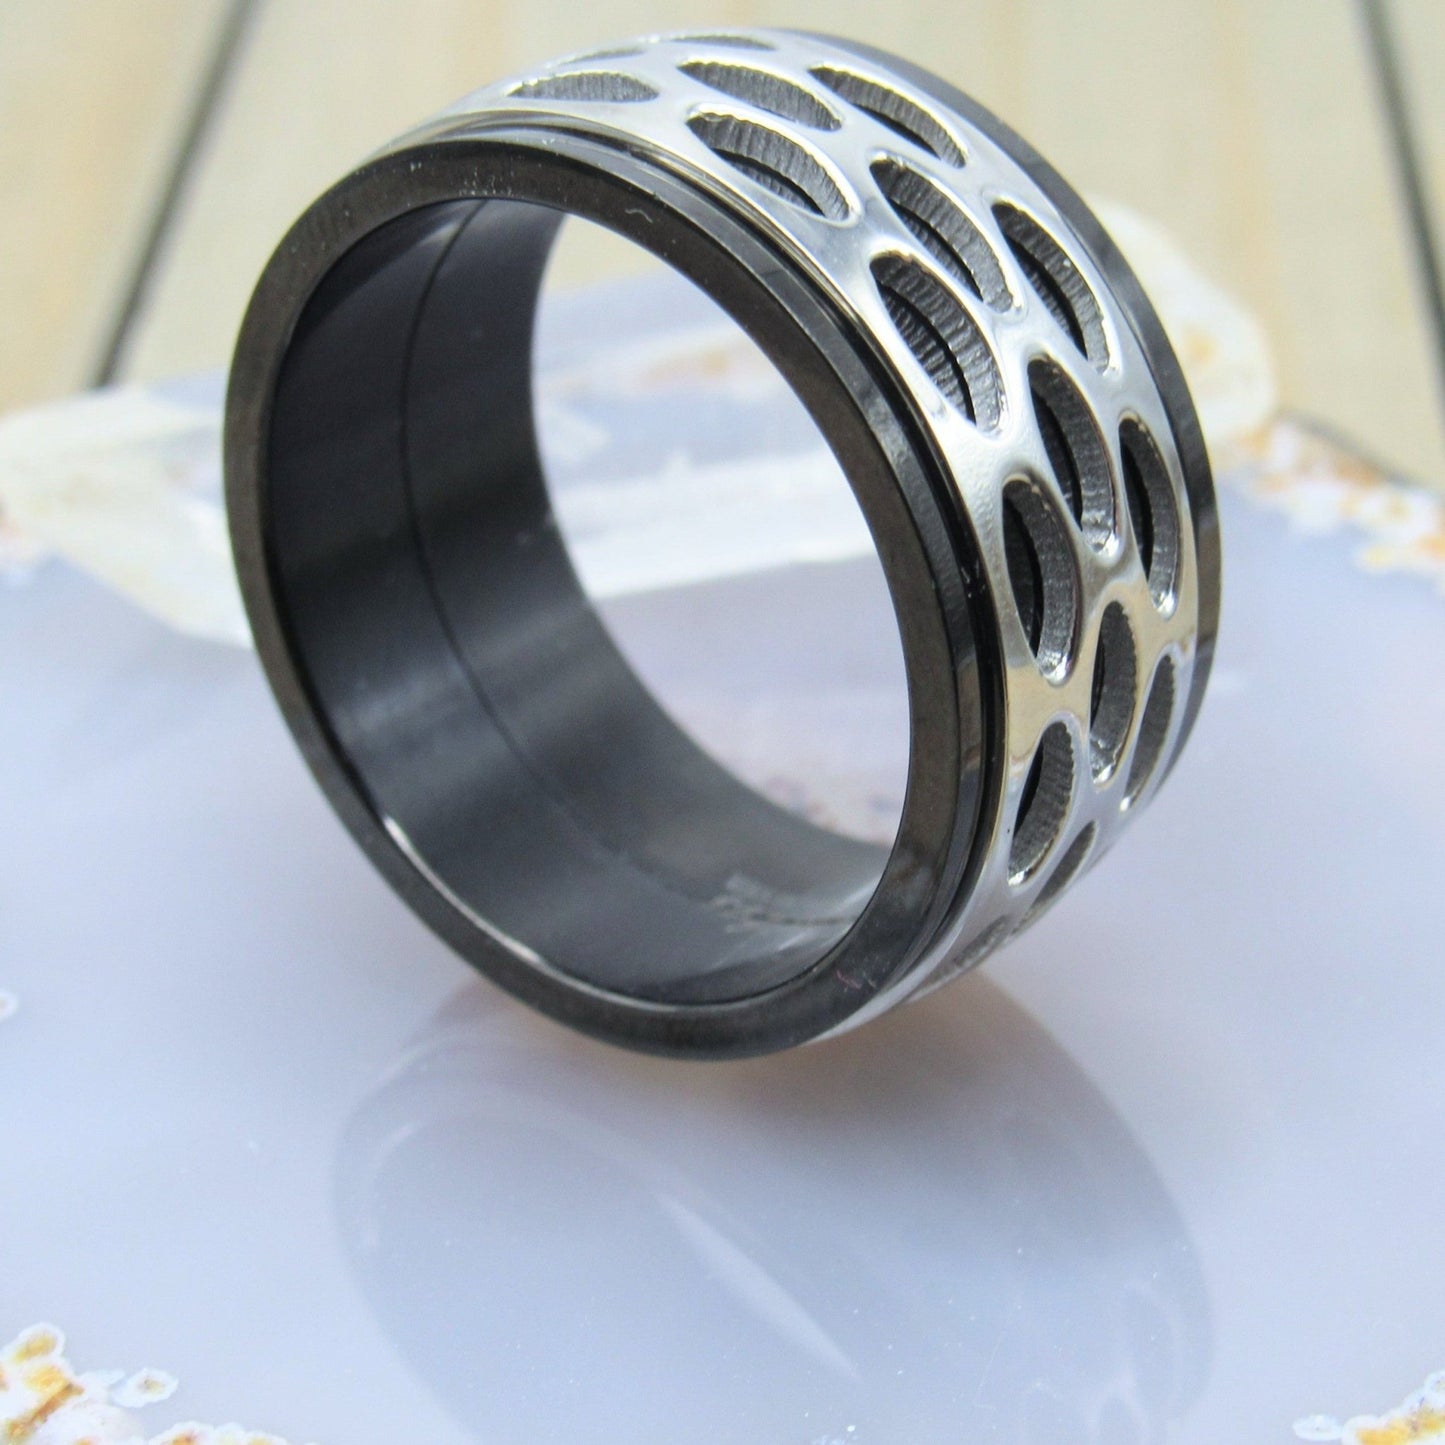 Mens spinner ring size 10 black titanium iop band stainless steel geometric pattern spinning design fashion accessory - Siren Body Jewelry